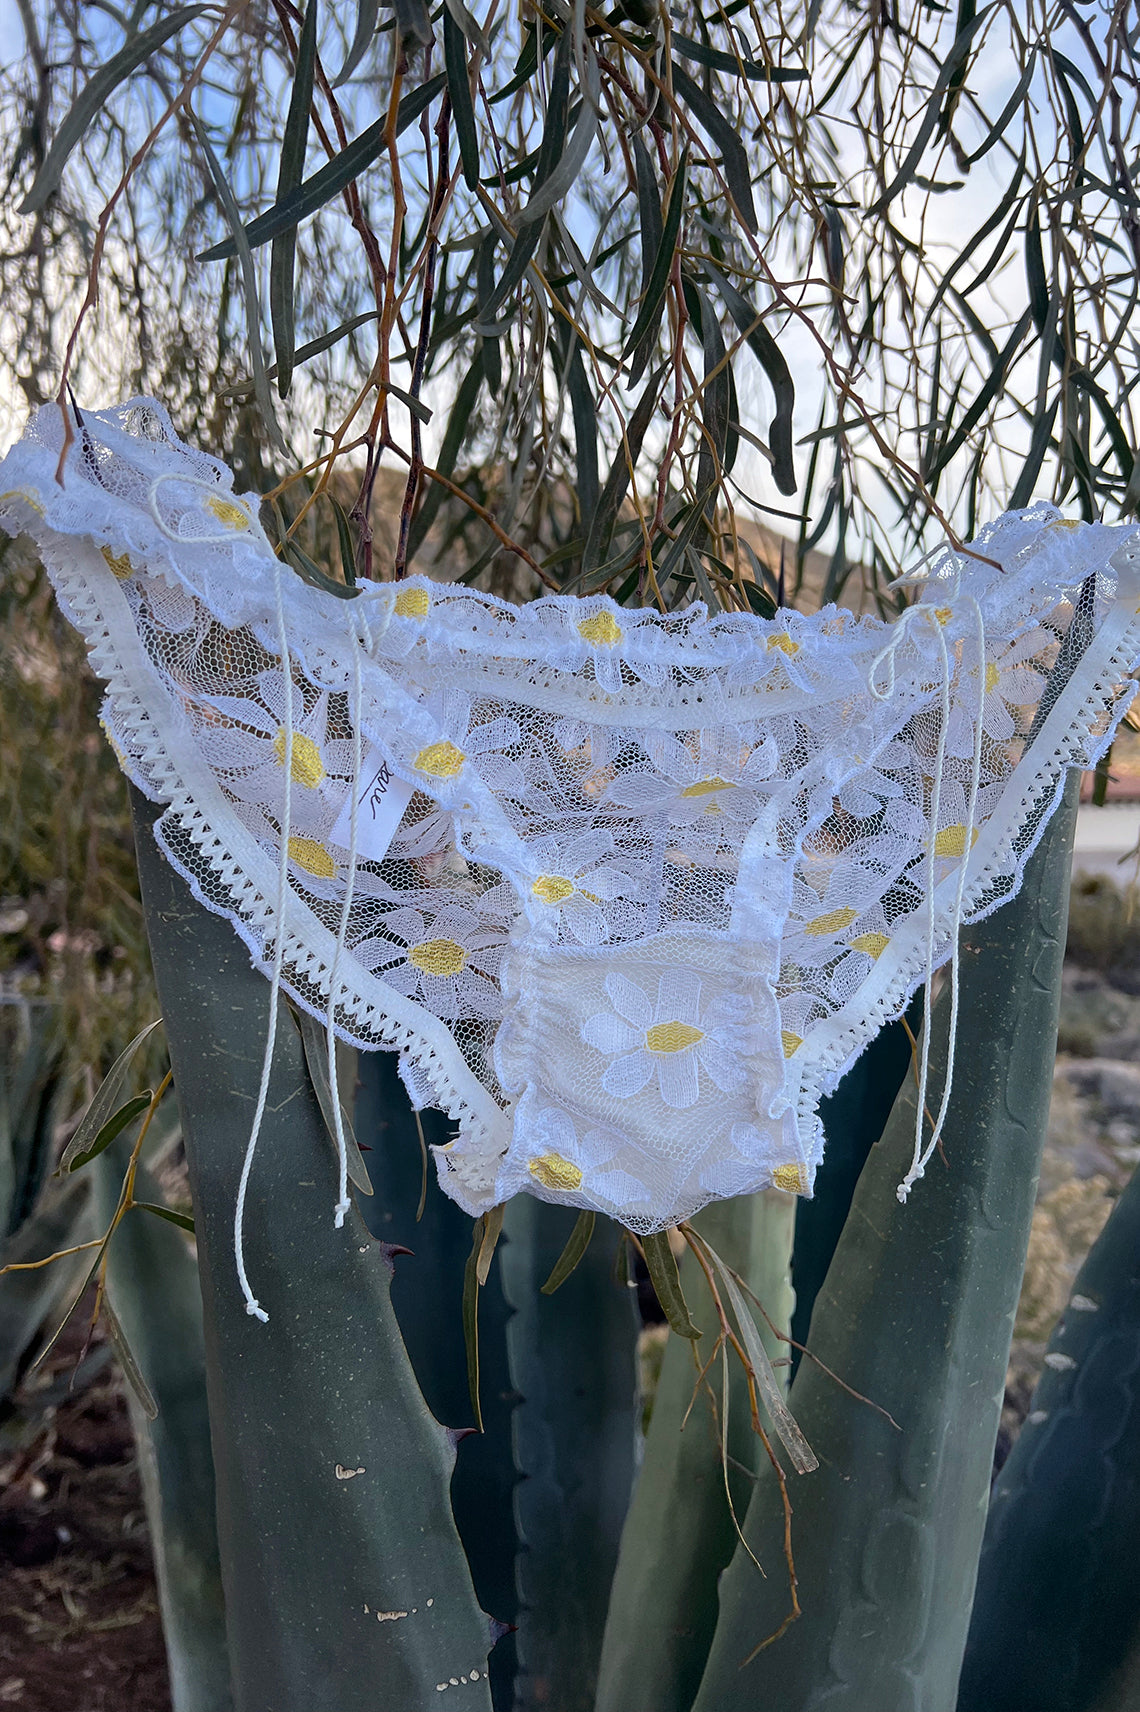 BACK IN STOCK! Anaphora Panty in Sheer Upcycled Vintage Daisy Tulle Mesh